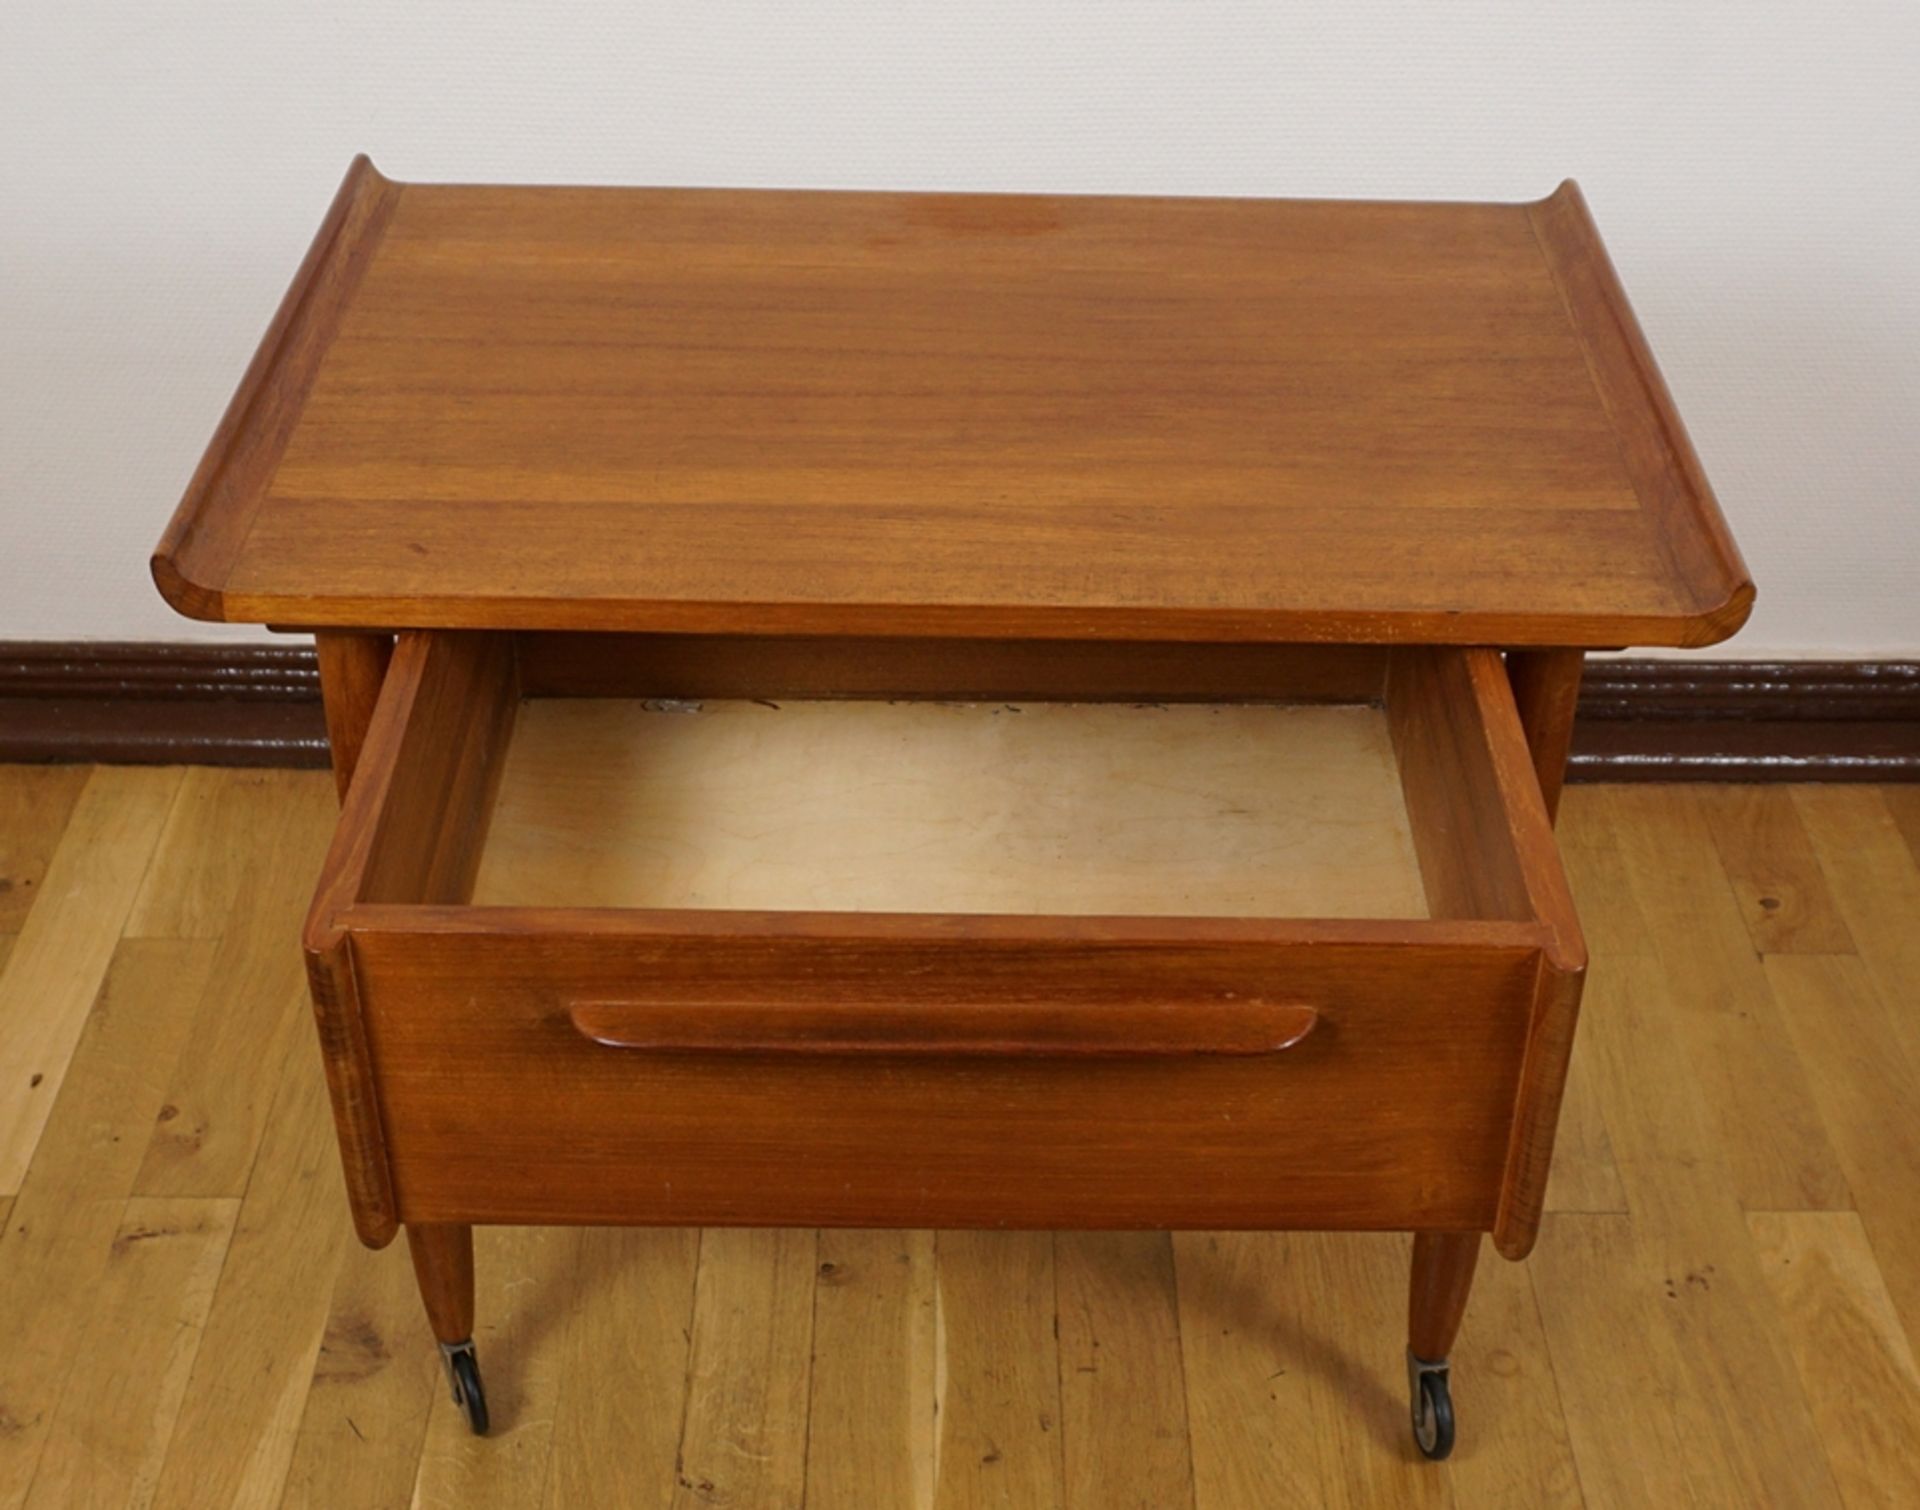 Sewing table with drawer, Denmark, 1960s - Image 3 of 5